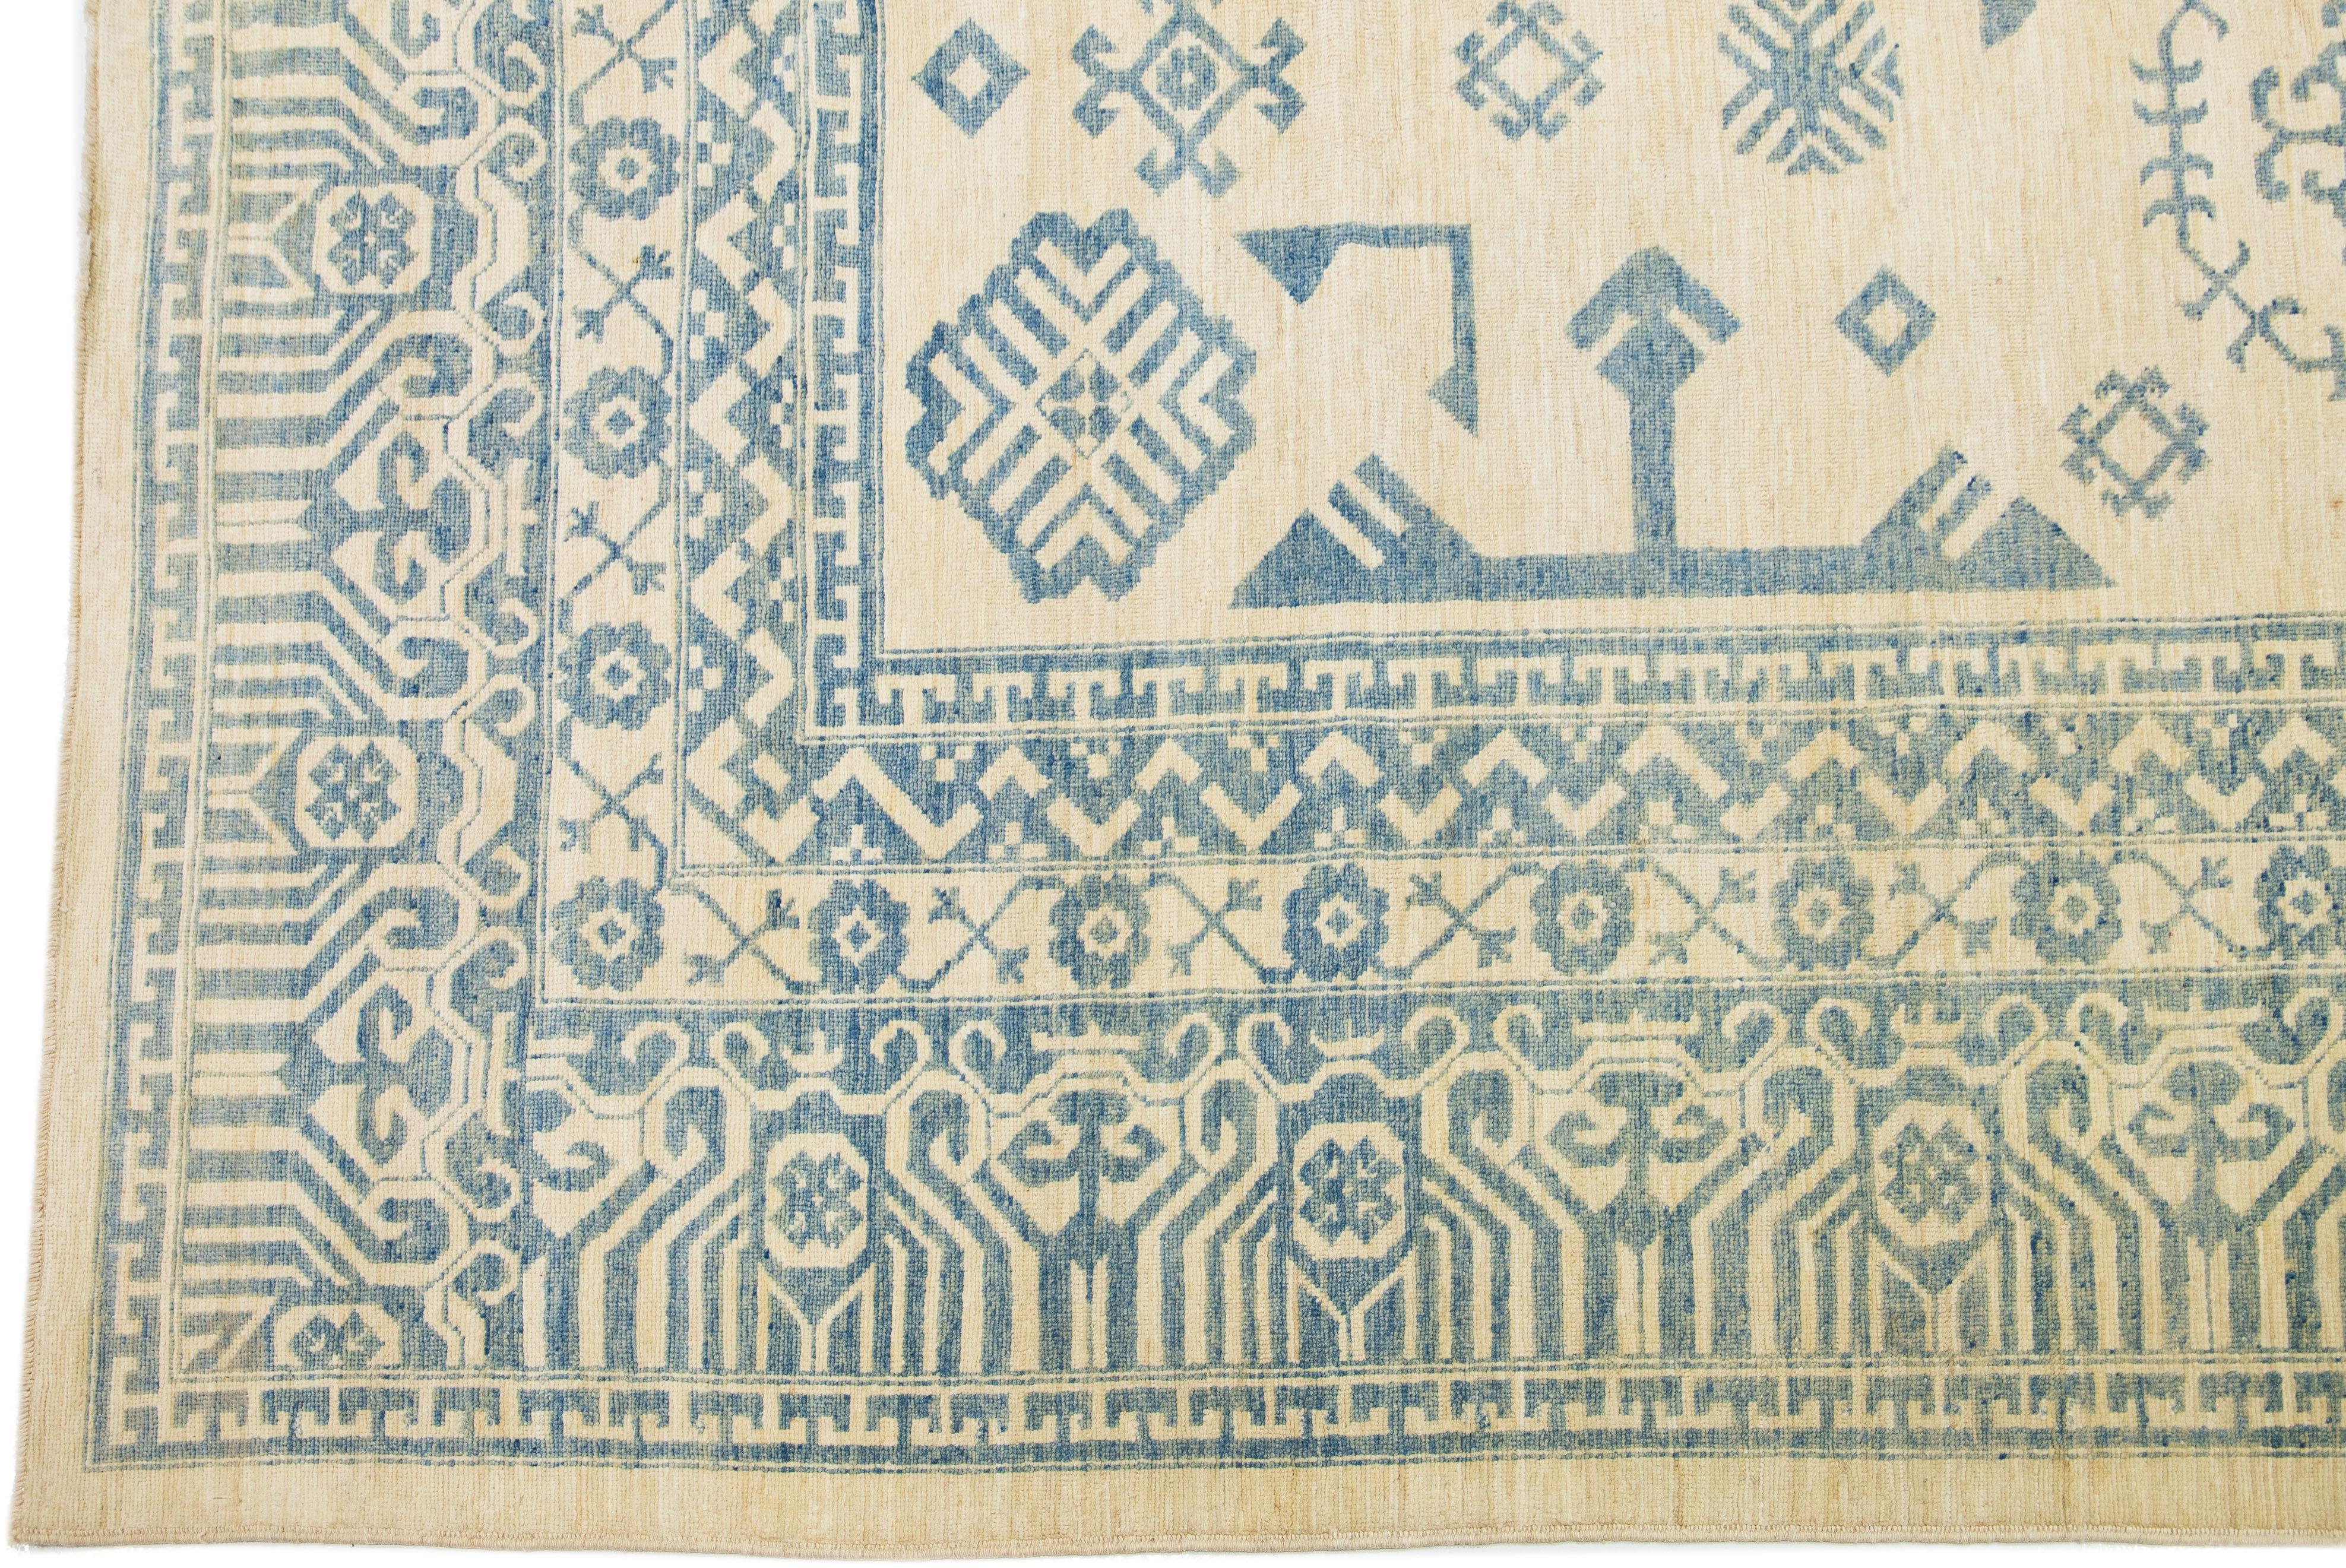 Beautiful Modern Khotan hand-knotted wool beige field. This Khotan rug has a beautifully designed frame and accent of blue in a gorgeous all-over geometric pattern design.

This rug measures 13'1 